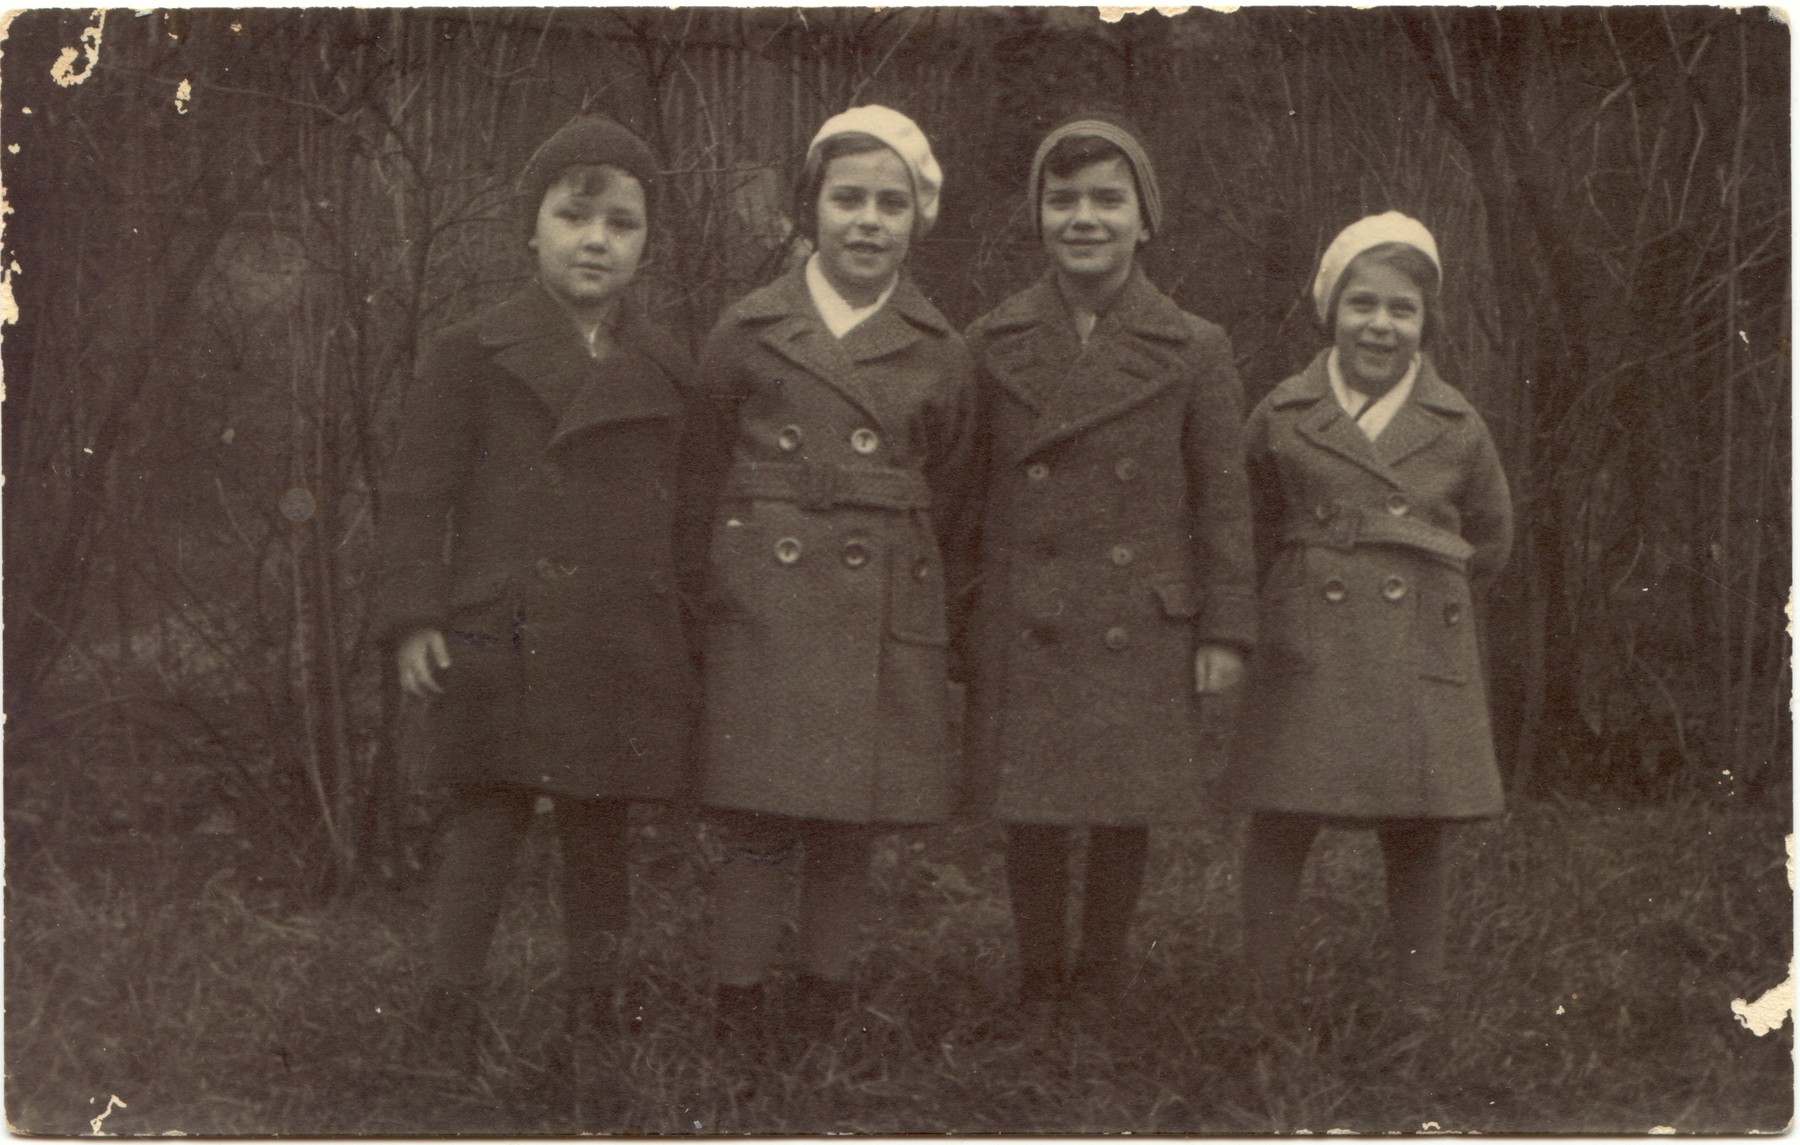 Portrait of four cousins who were on the St. Louis.

Pictured are Horst, Ruthild, Lutz and Sibyll Gruenthal.